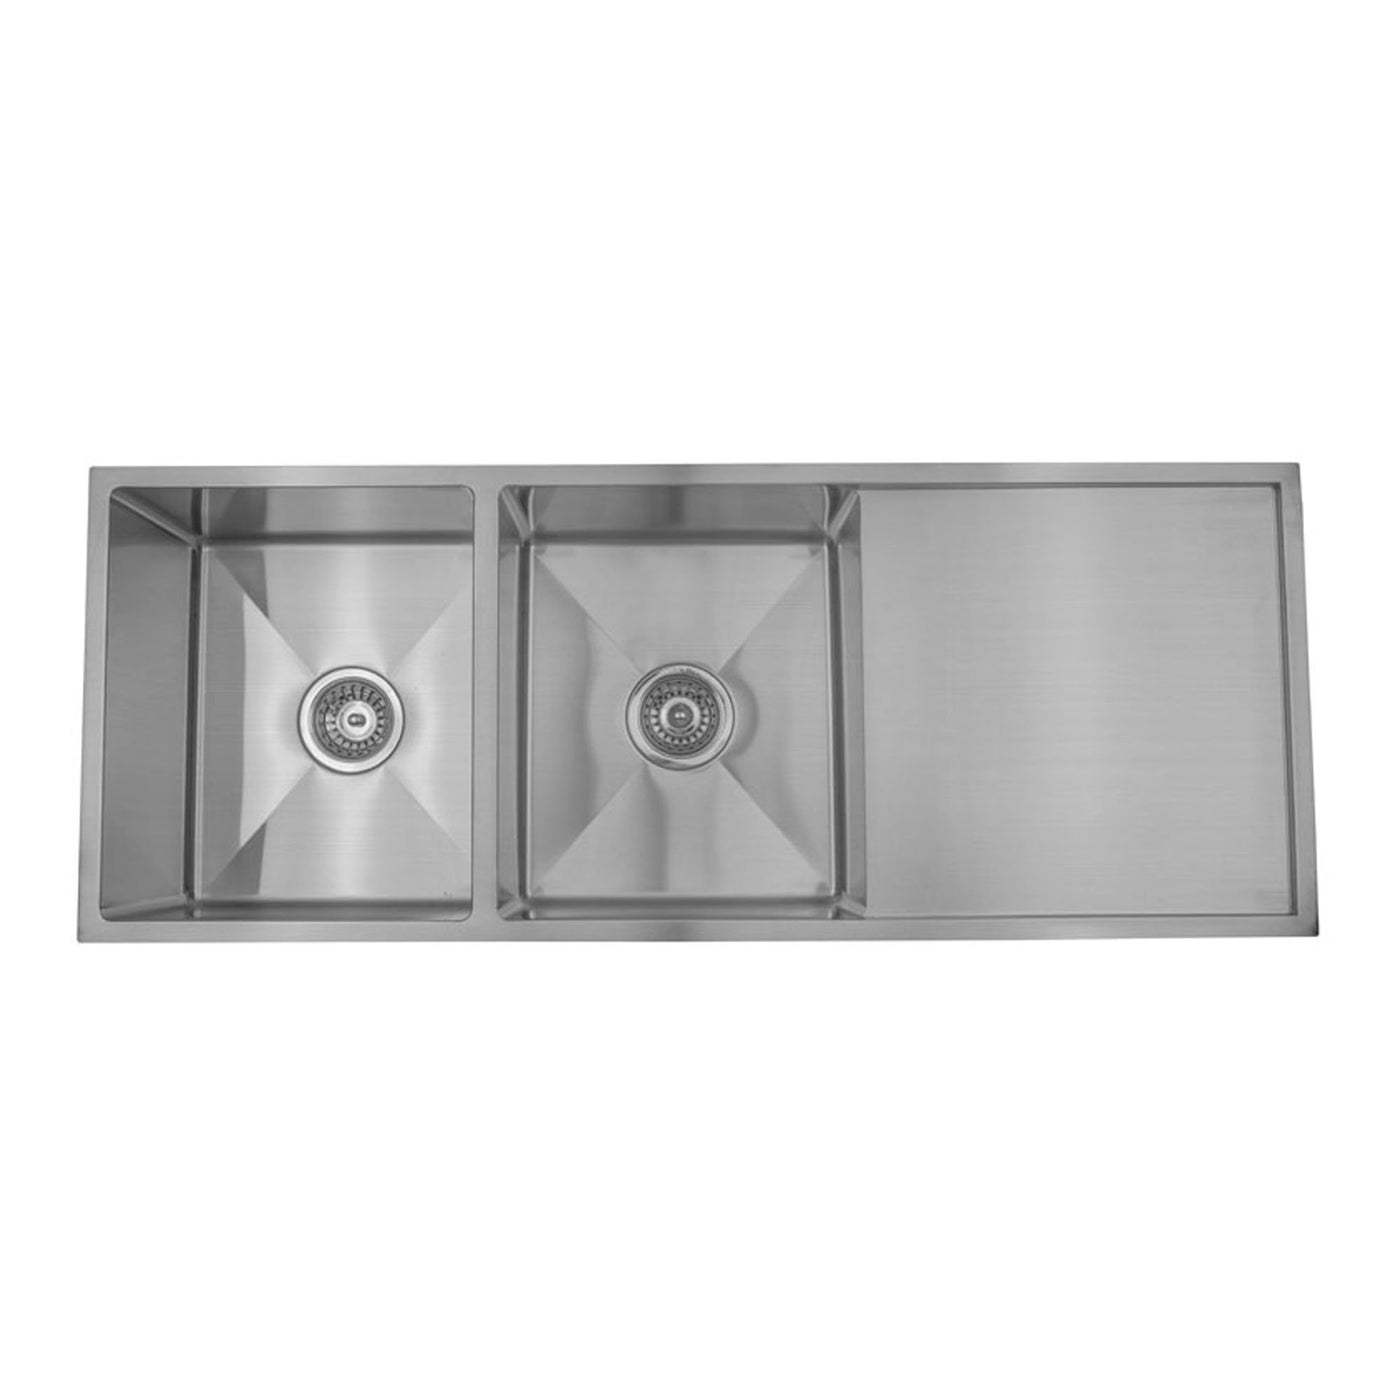 Comets Round Under/Overmount Double Bowl Sink With Drainer